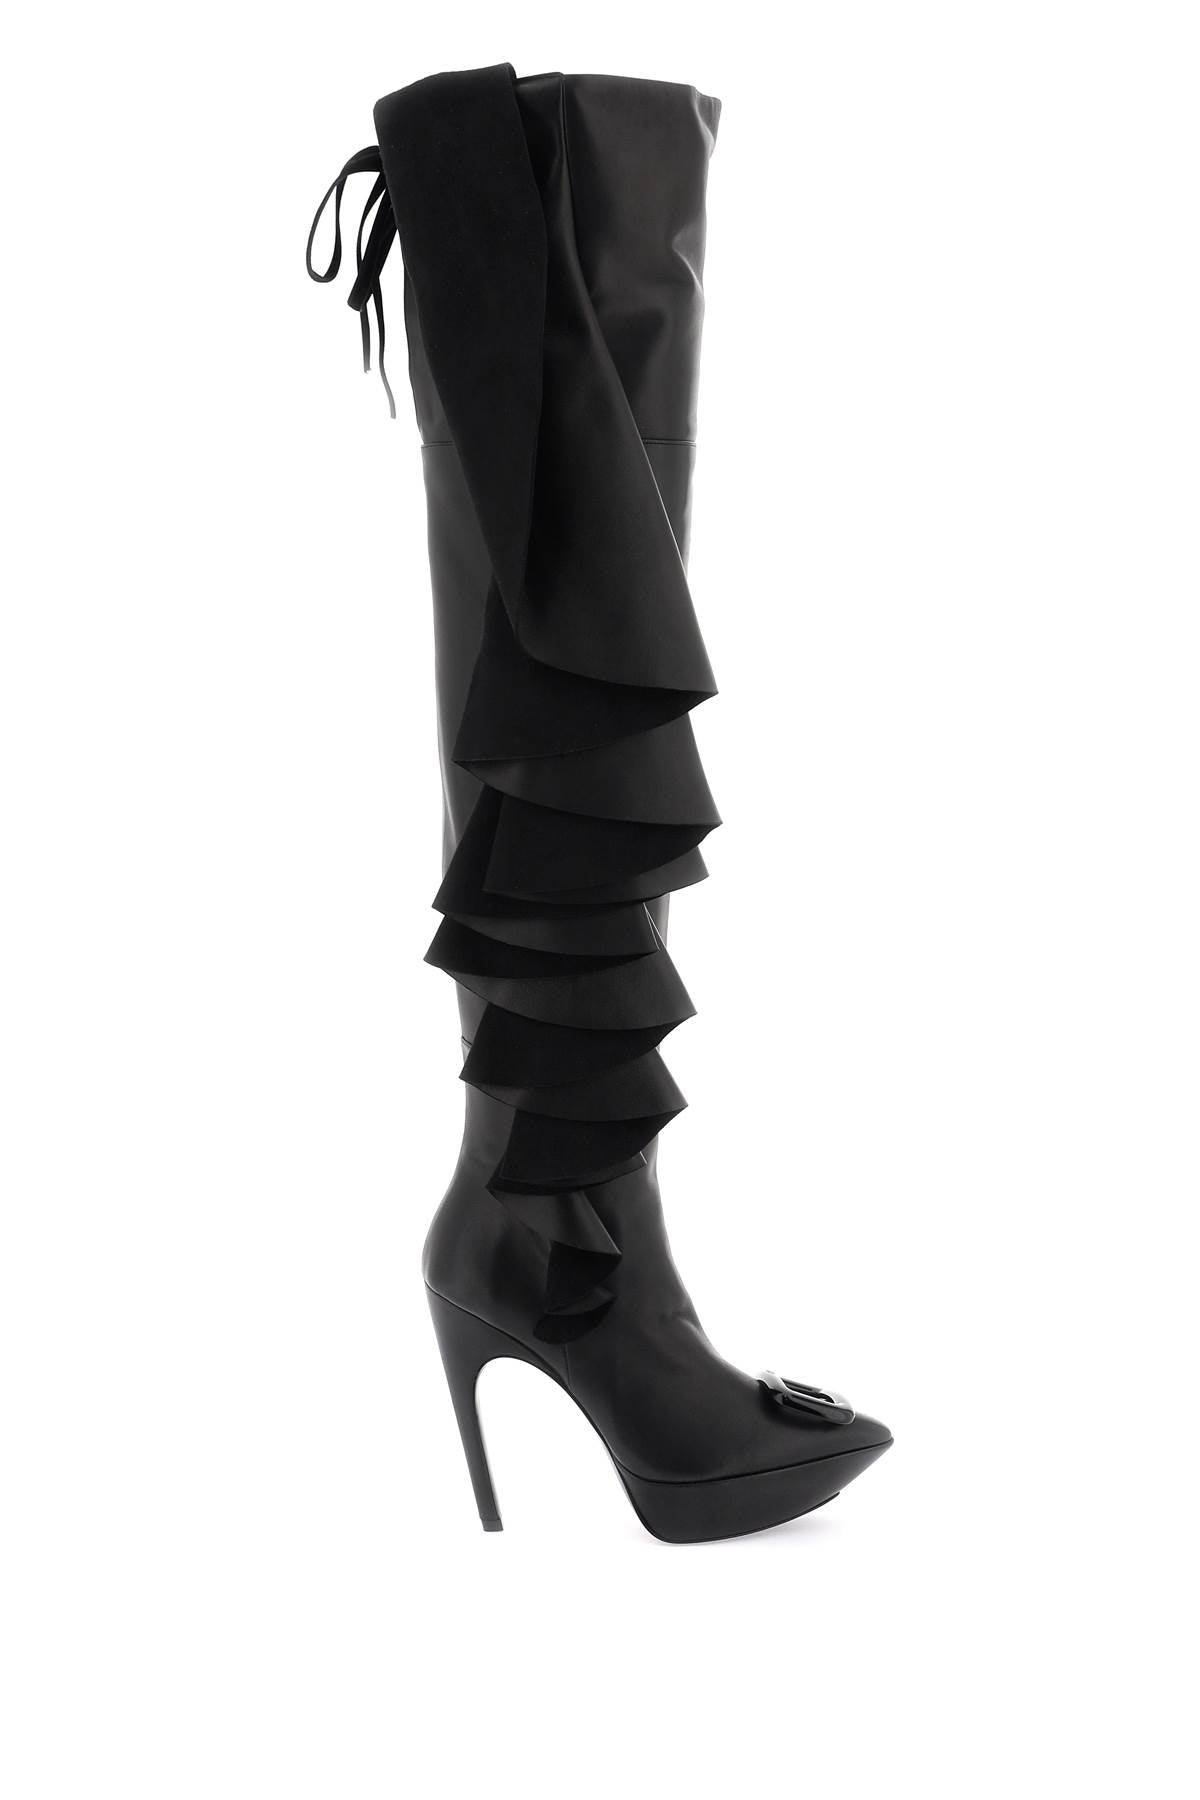 ROGER VIVIER Maxi Ruffle Buckle Boots in Black - FW23